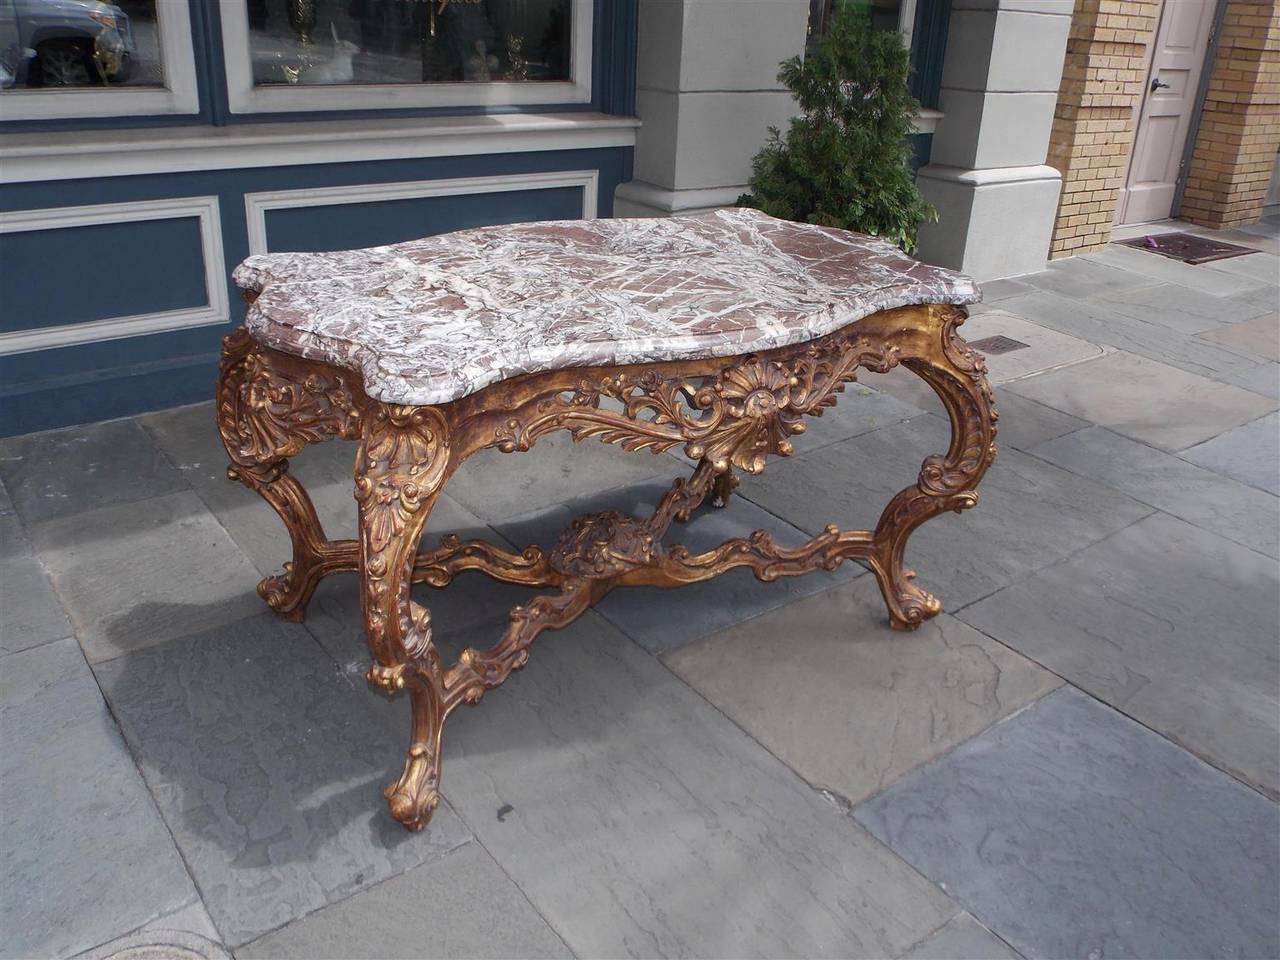 French serpentine marble-top gilt center table with floral carved skirts, floral cross stretchers with centered ribbon basket, and terminating on scrolled floral cabriole legs. All original, Mid-18th century.